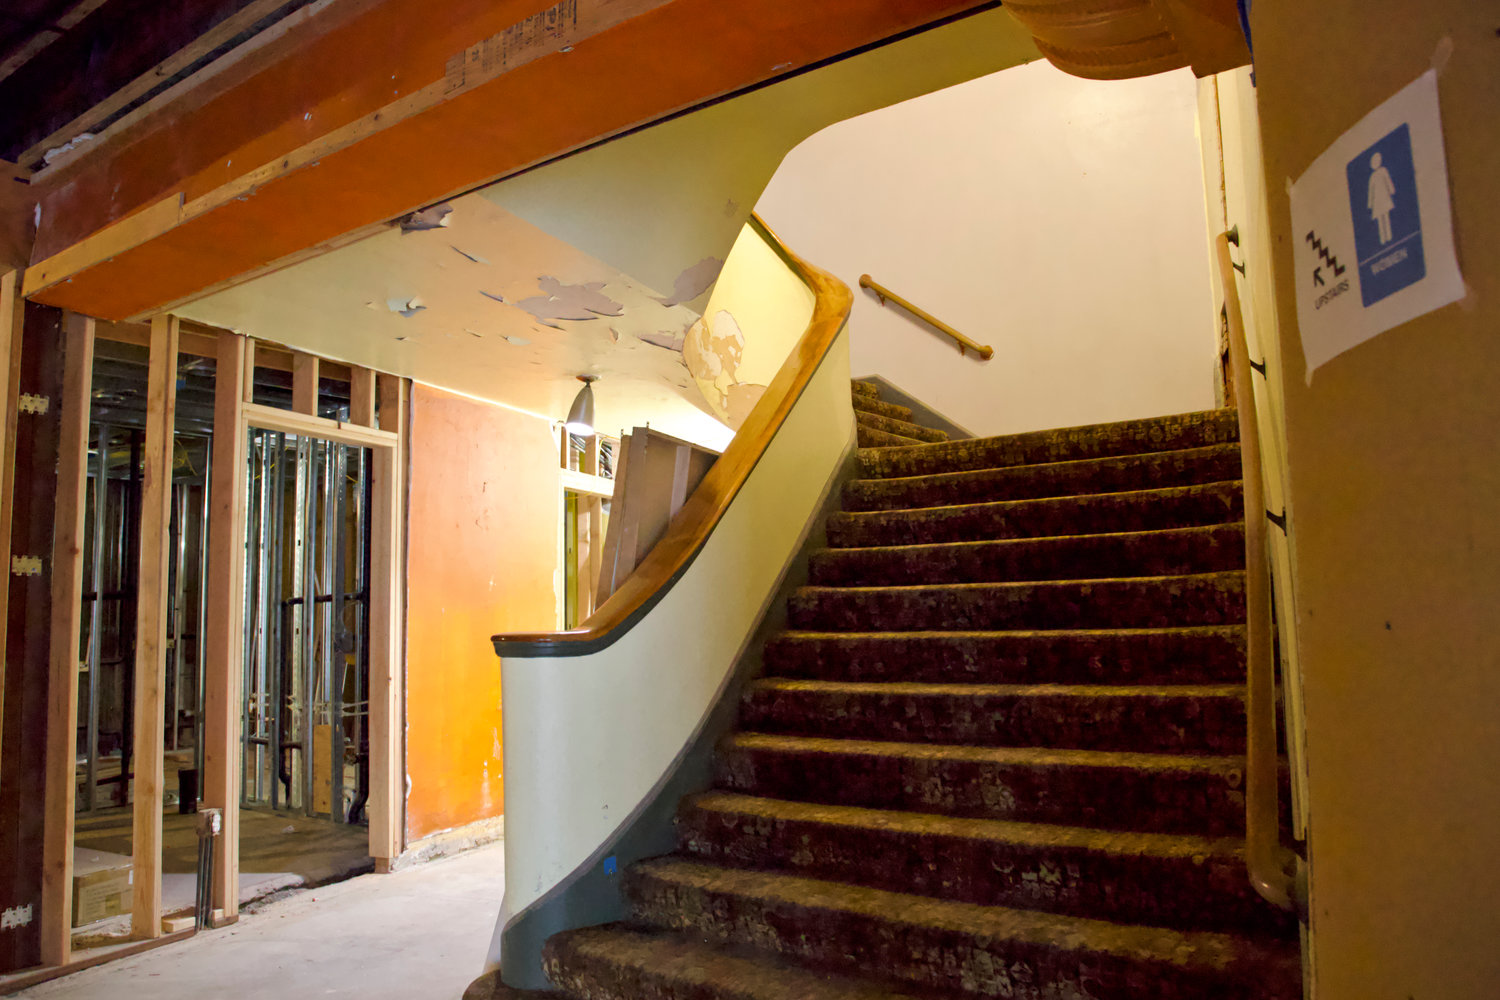 An unfinished stairwell inside the Historic Centralia Fox Theatre on Friday.